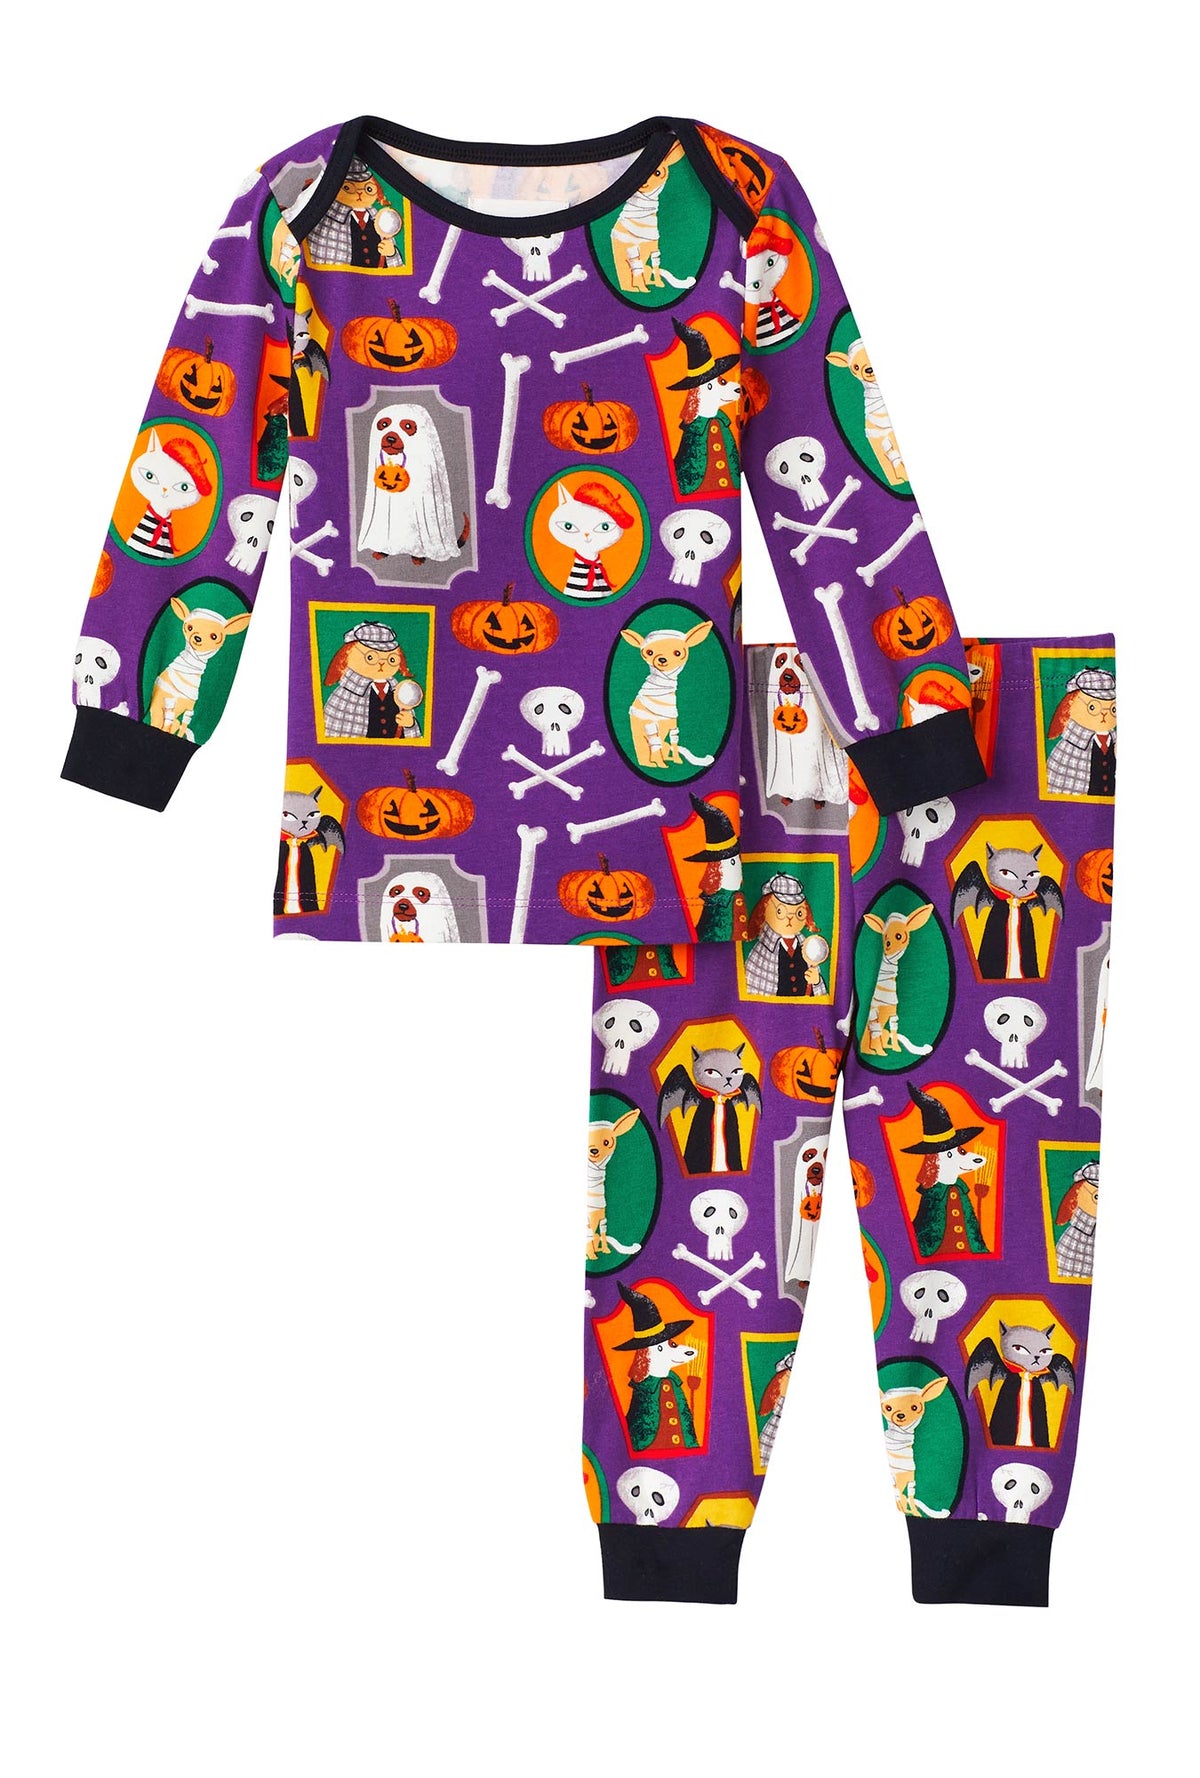 A Long Sleeve Classic Stretch Jersey PJ Set with Trick or treat print